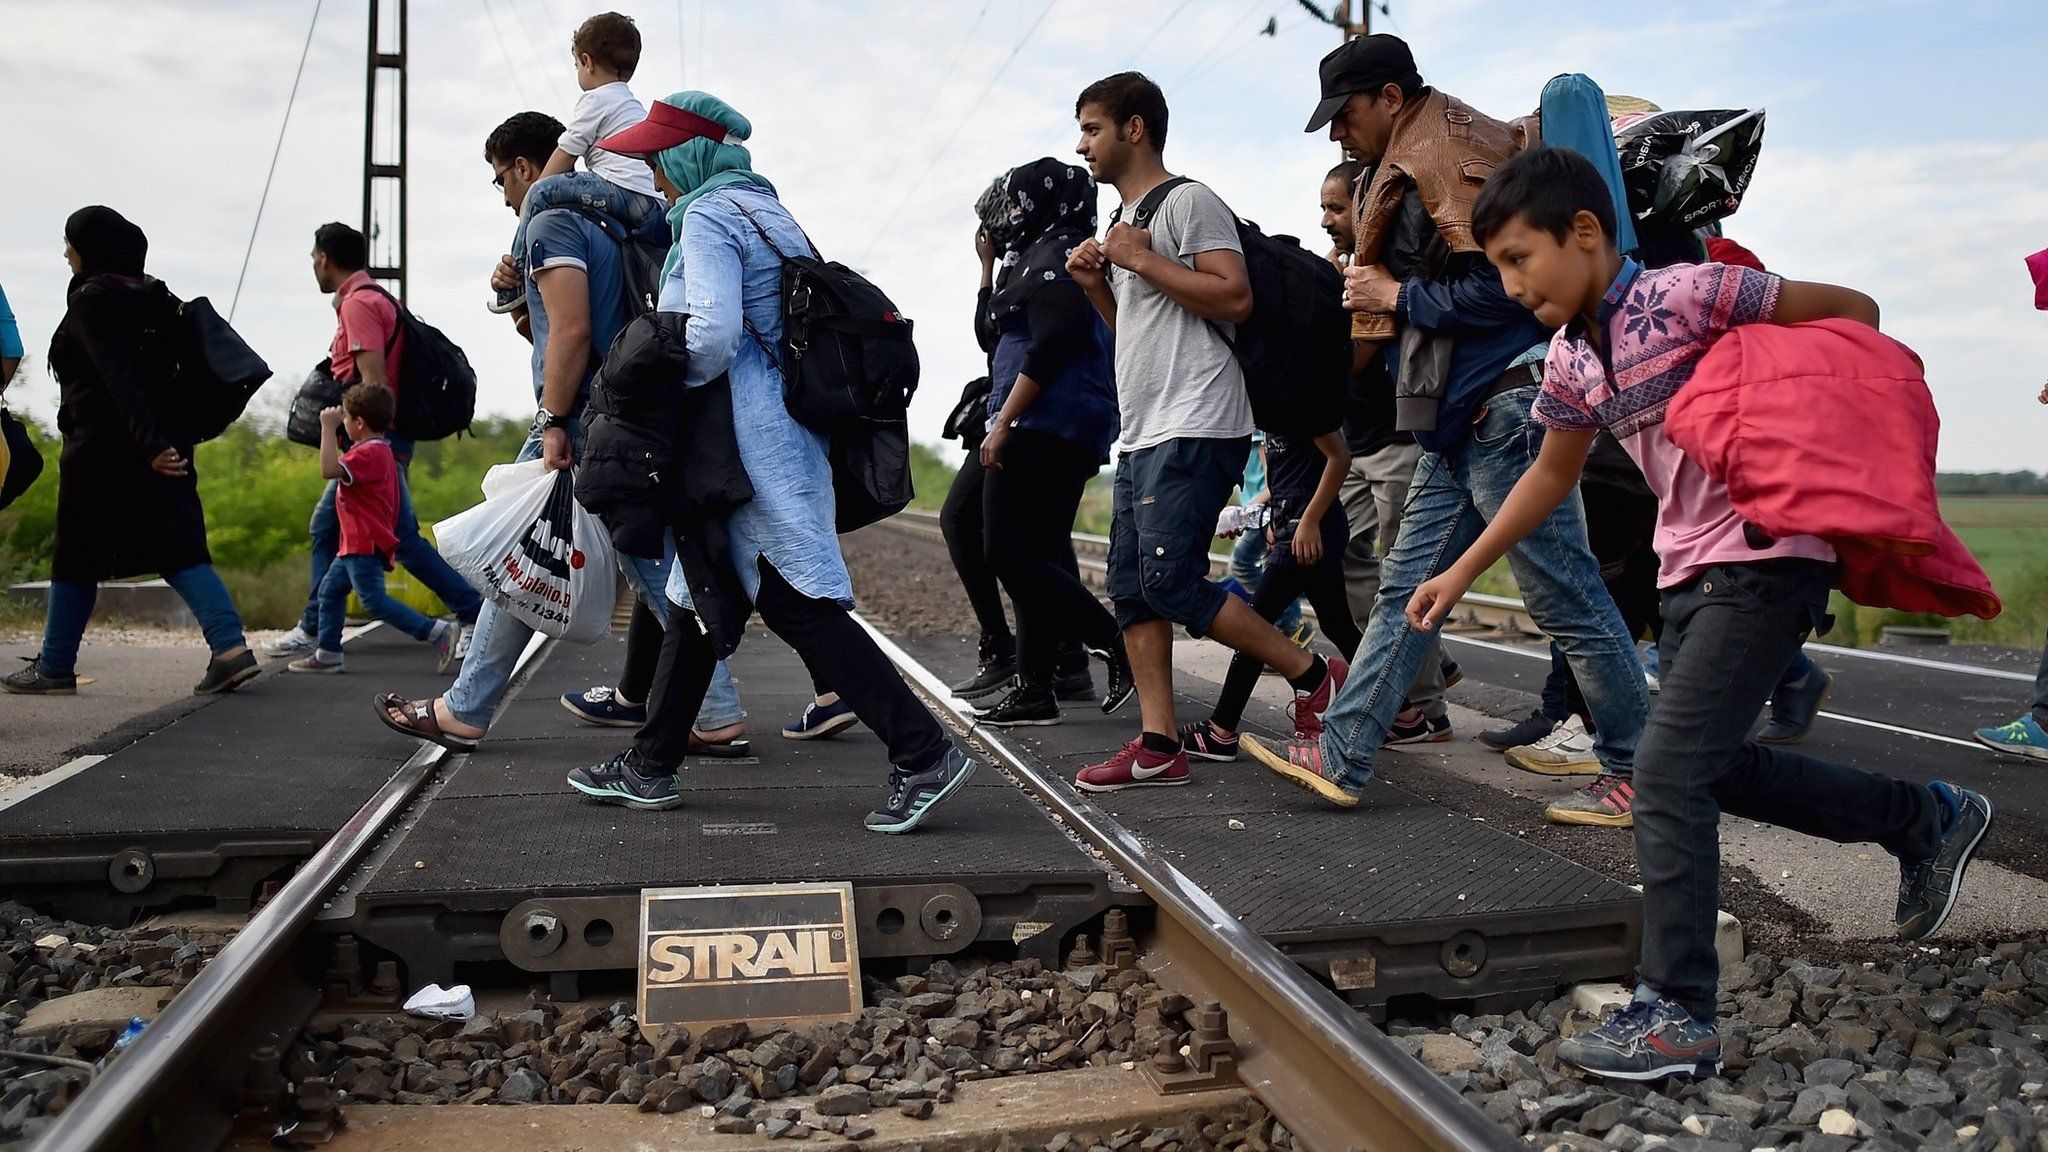 Migrants try to cross from Hungary to Austria in September 2015